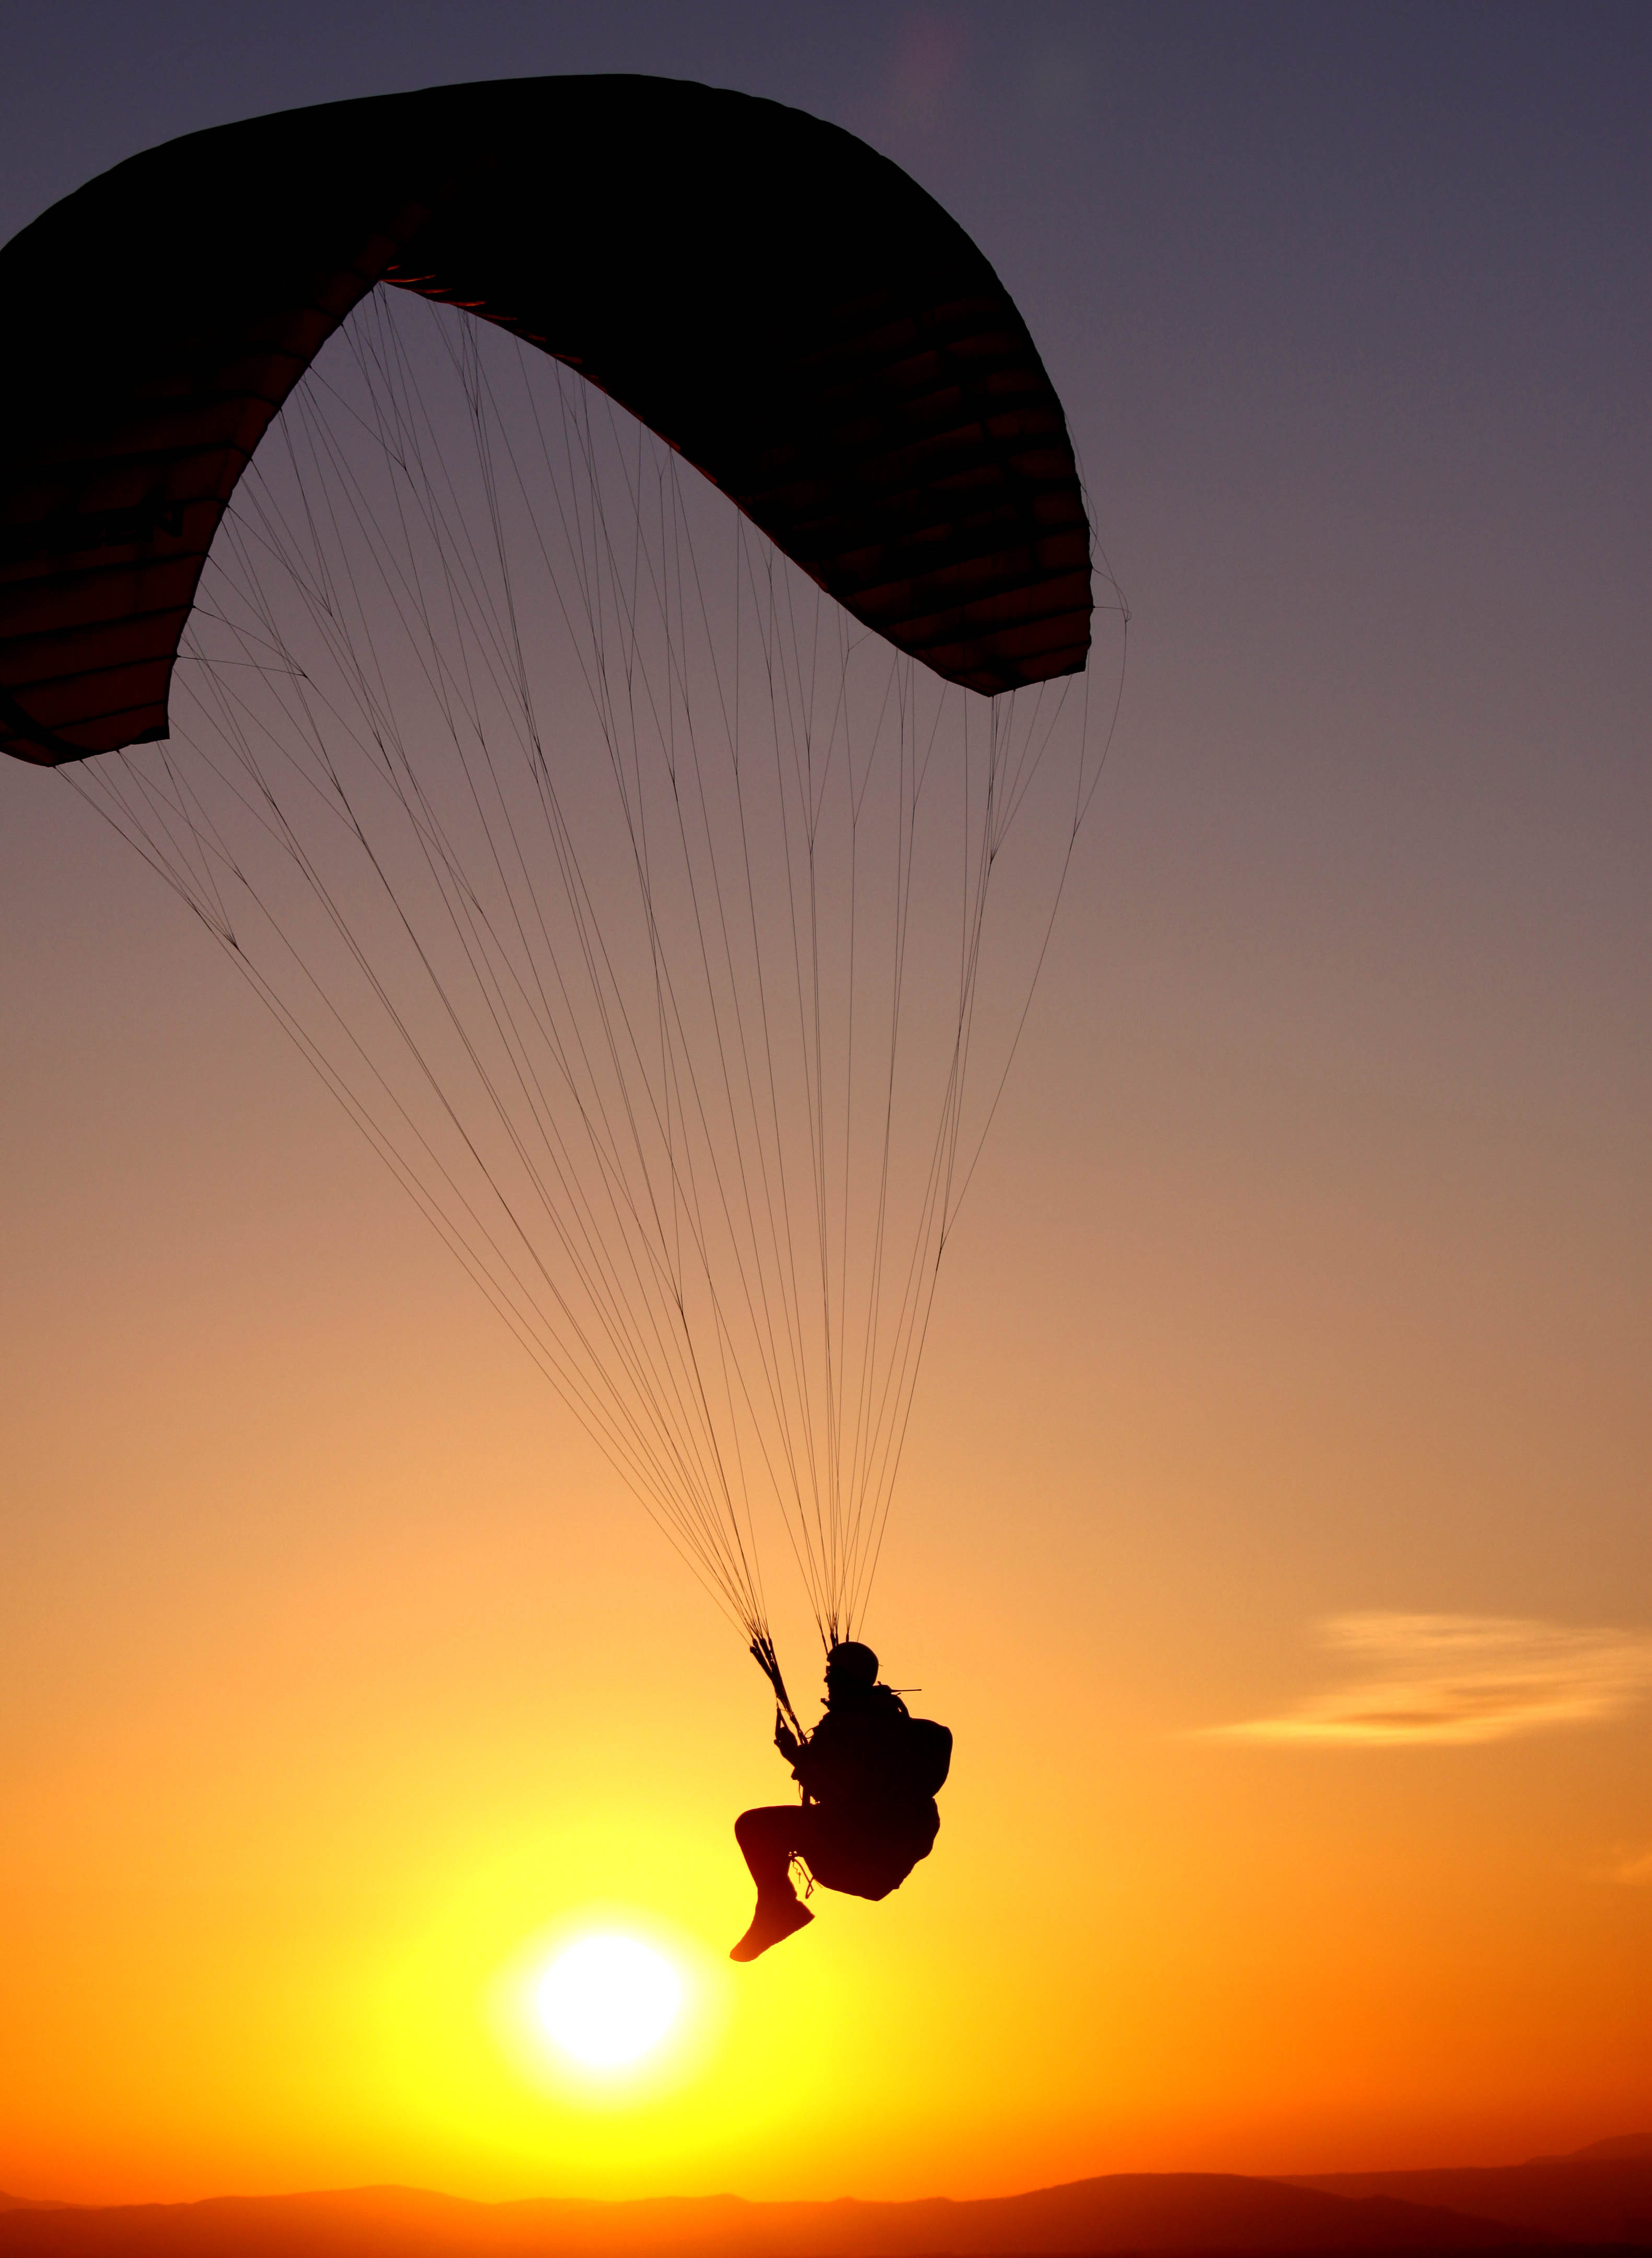 paragliding, flight, paraglider, person, sports, sky, silhouette, human cell phone wallpapers